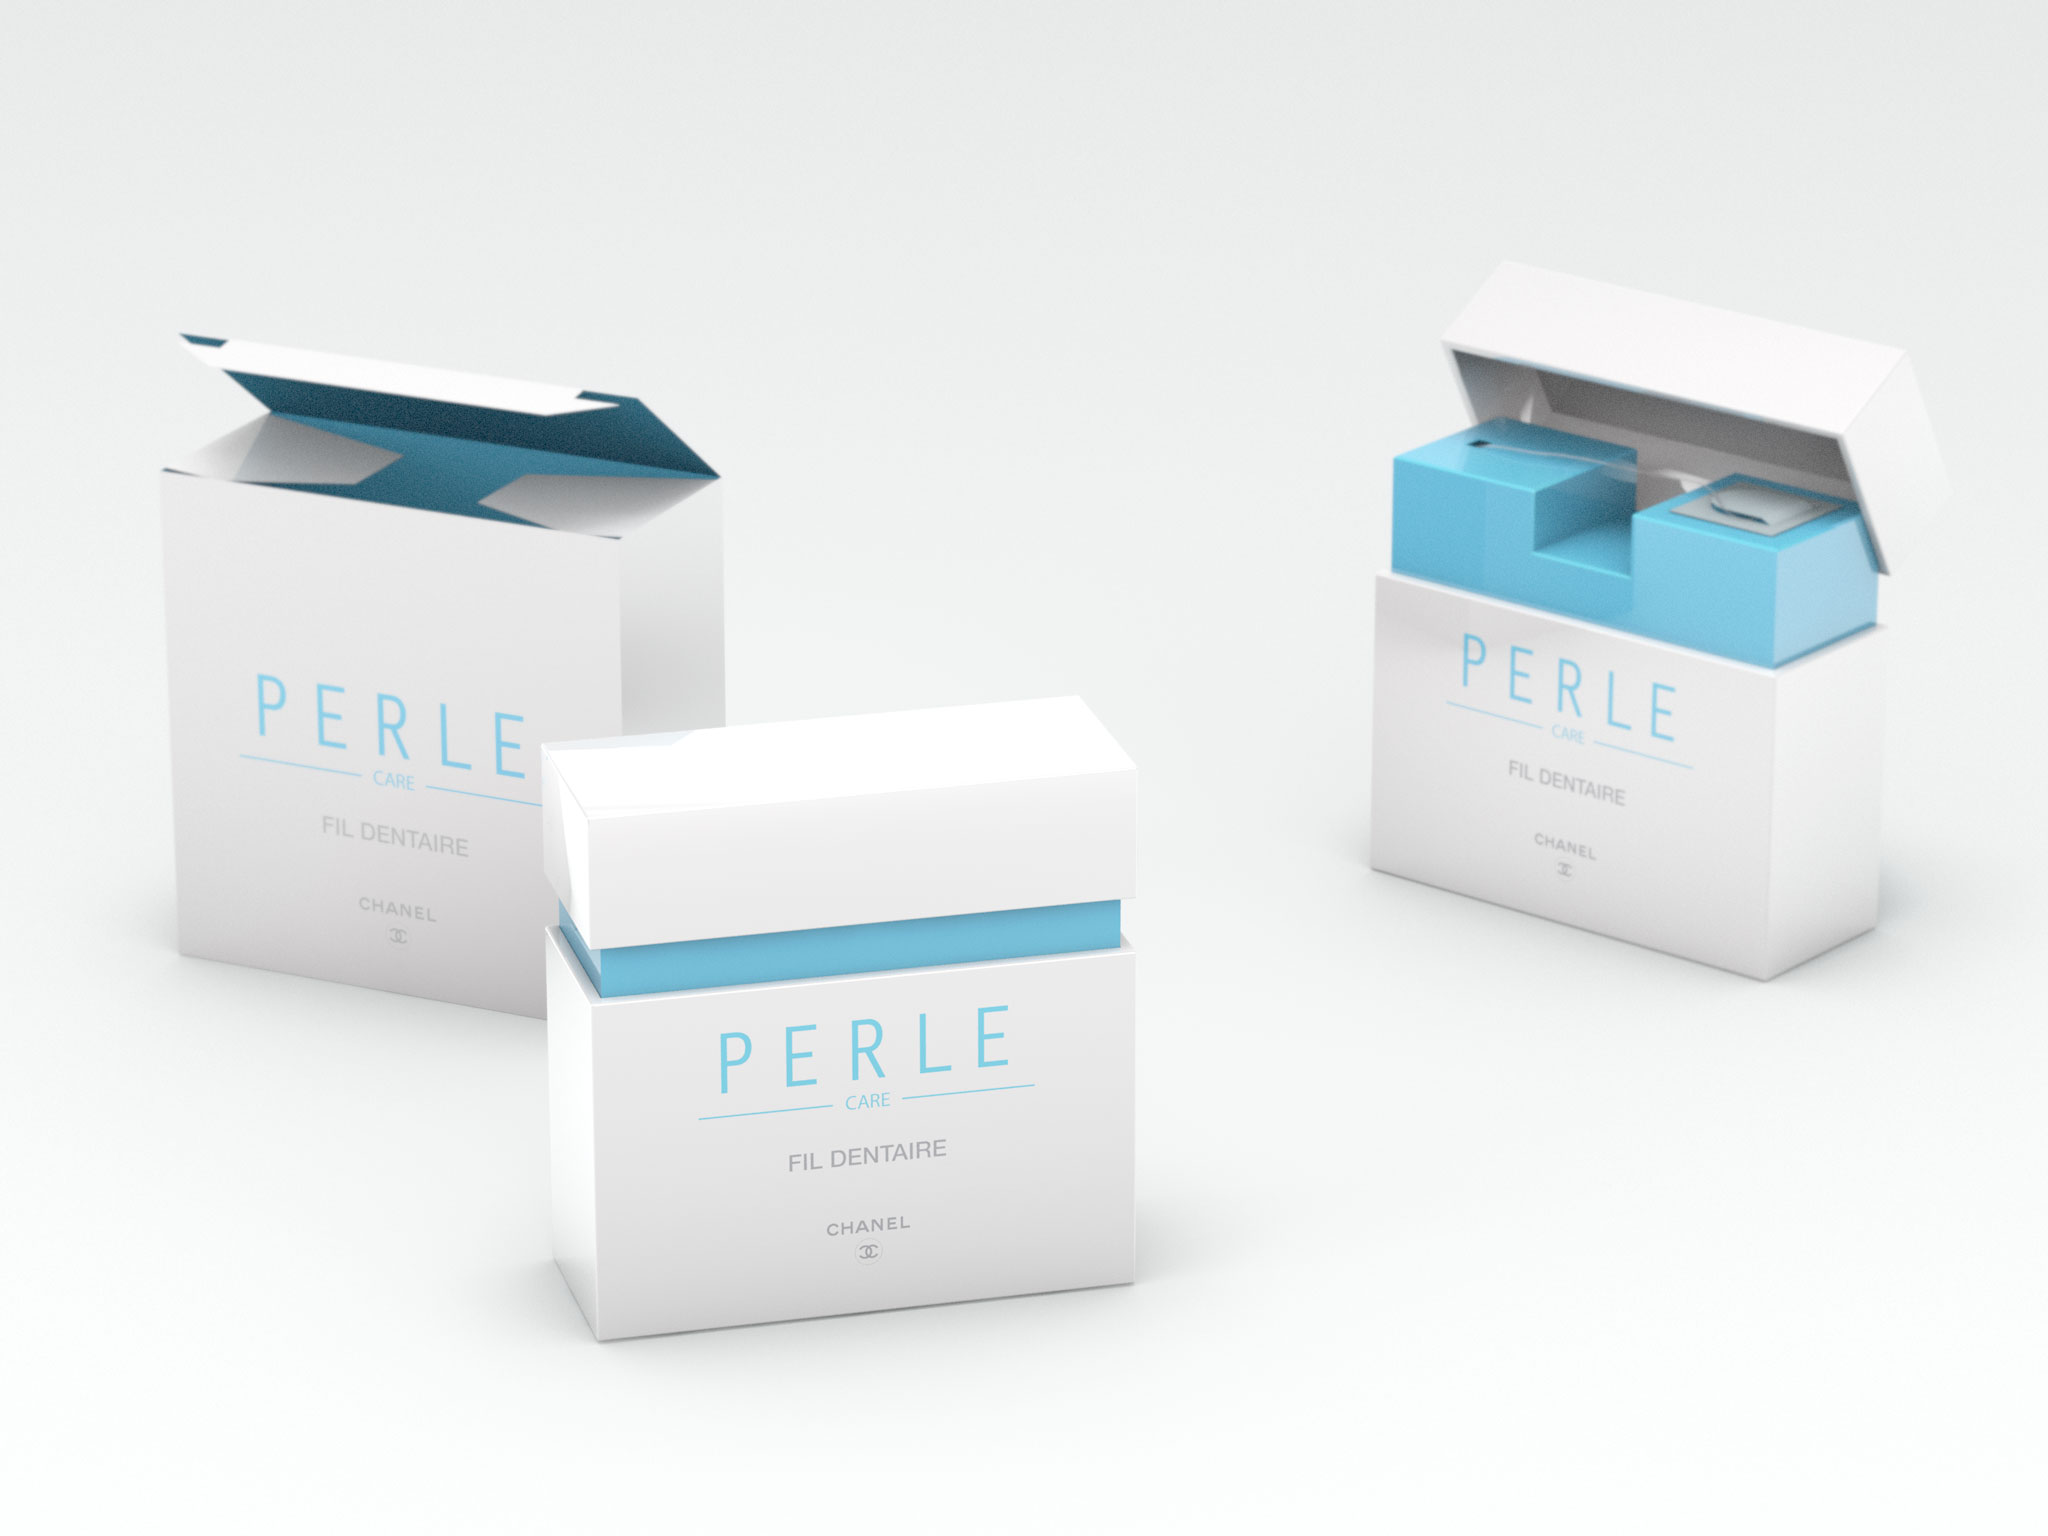 Perle product lineup